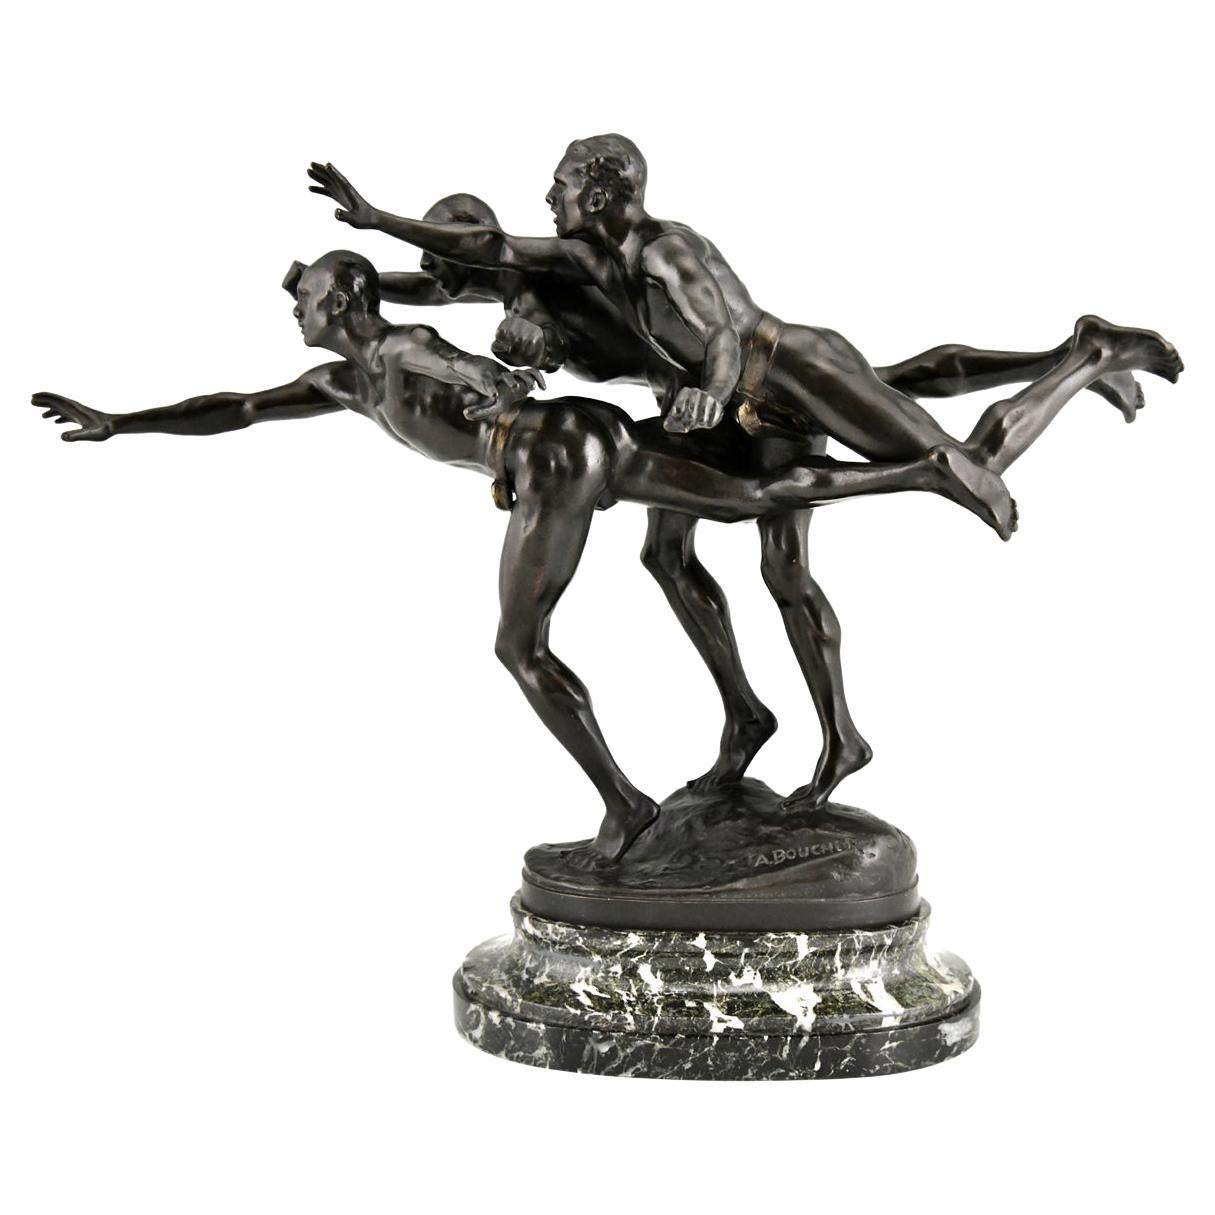 Au But, Antique Bronze Sculpture 3 Nude Runners by Alfred Boucher, France, 1890